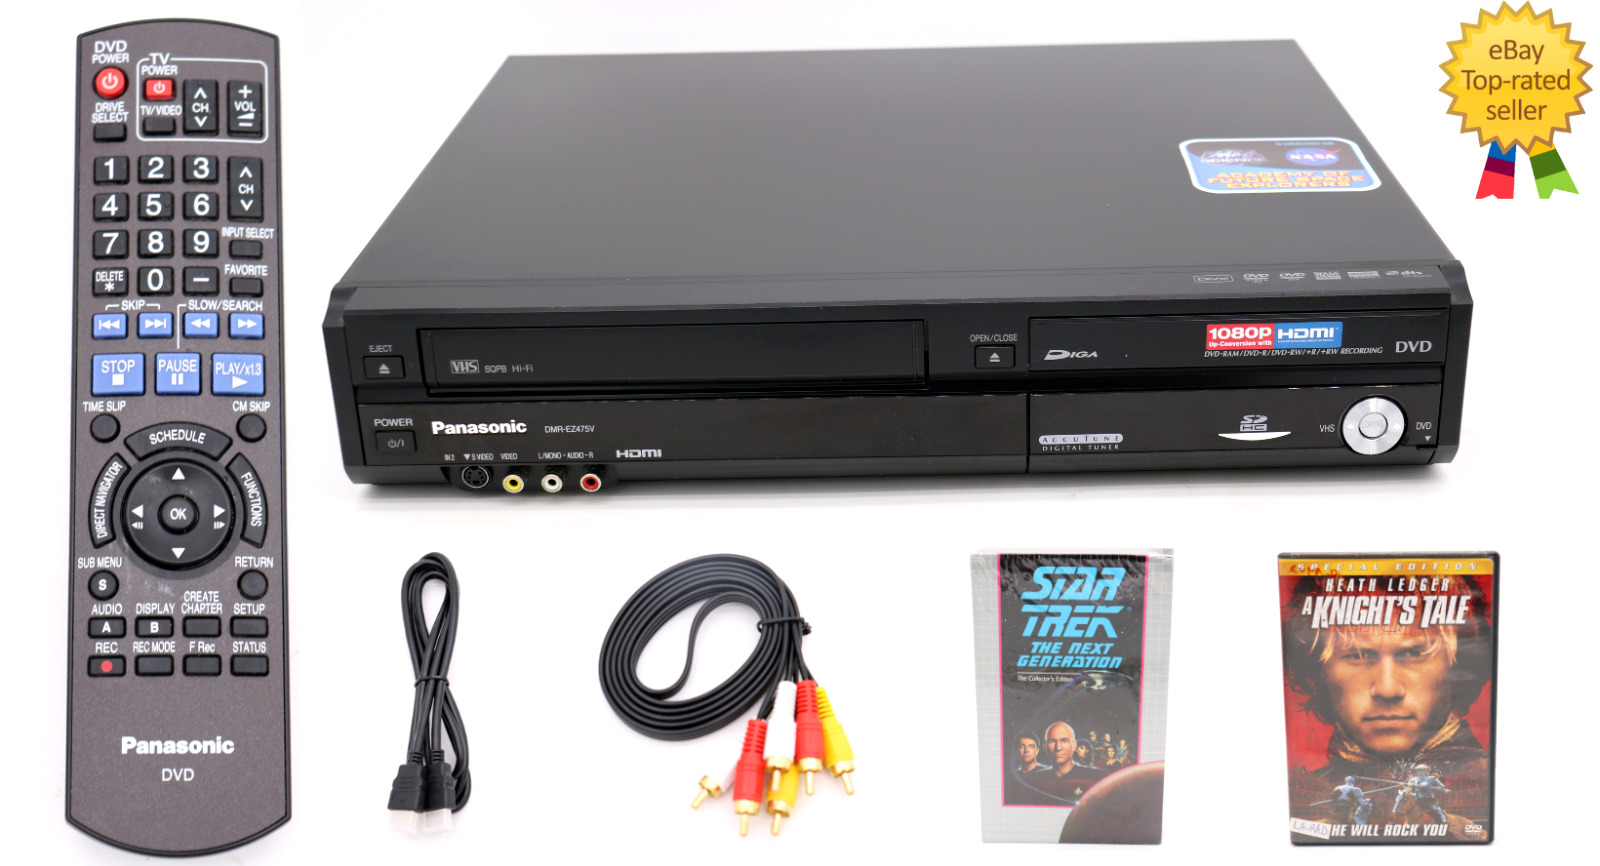 Please read the item\'s DMR-EZ475V DVD VCR Combo Recorder HDMI Output with Remote